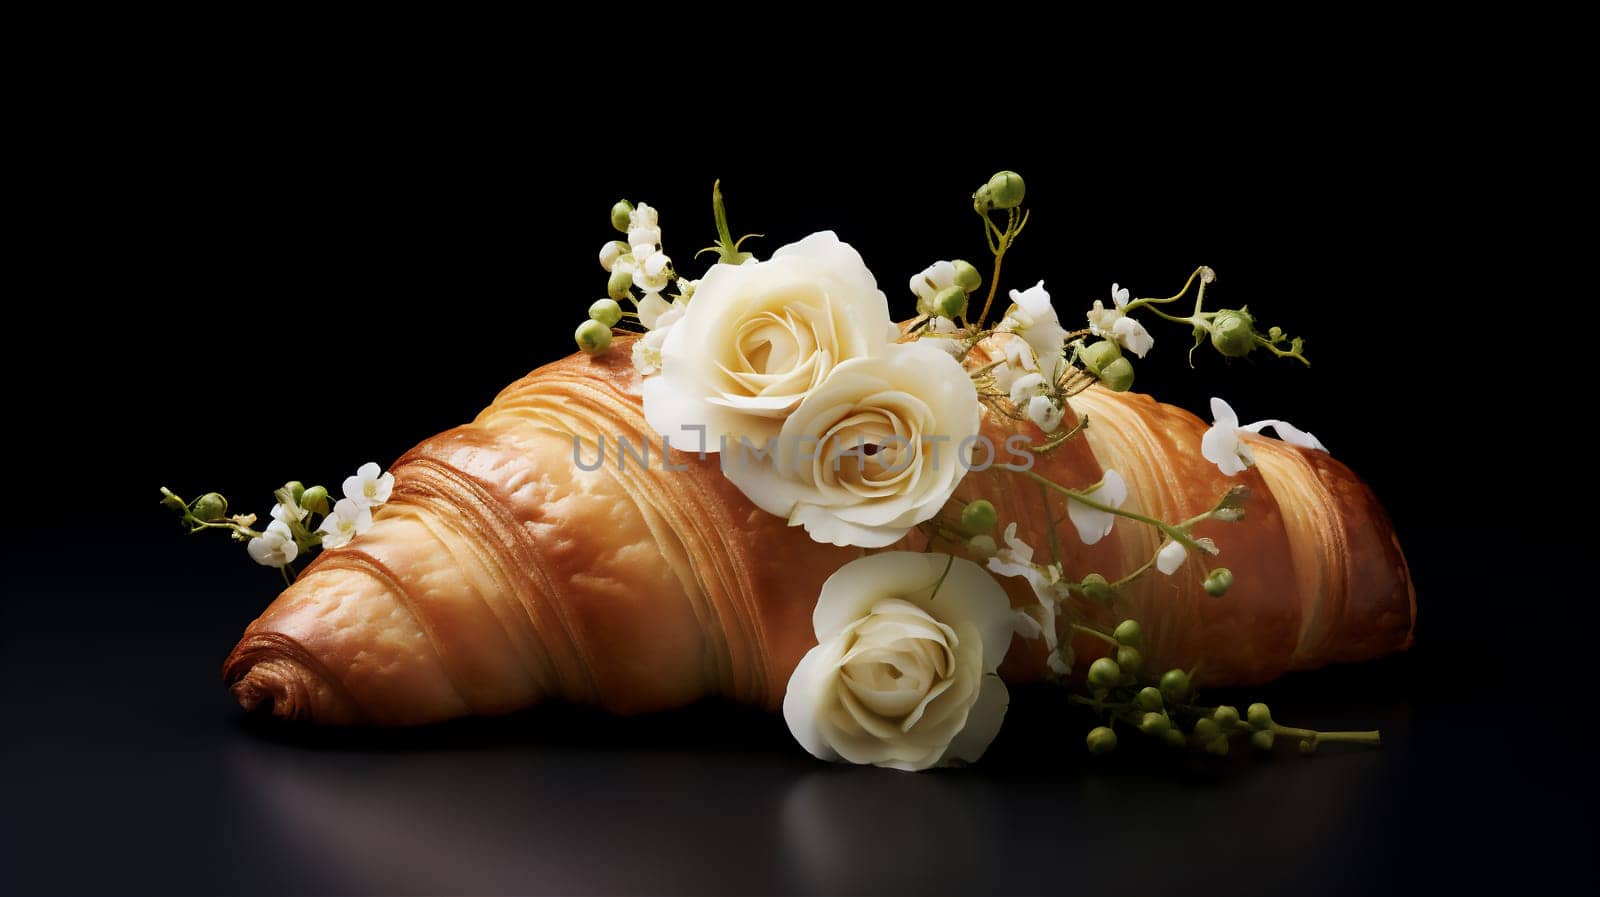 Tasty croissant with beautiful white flowers on black background. French traditional food concept